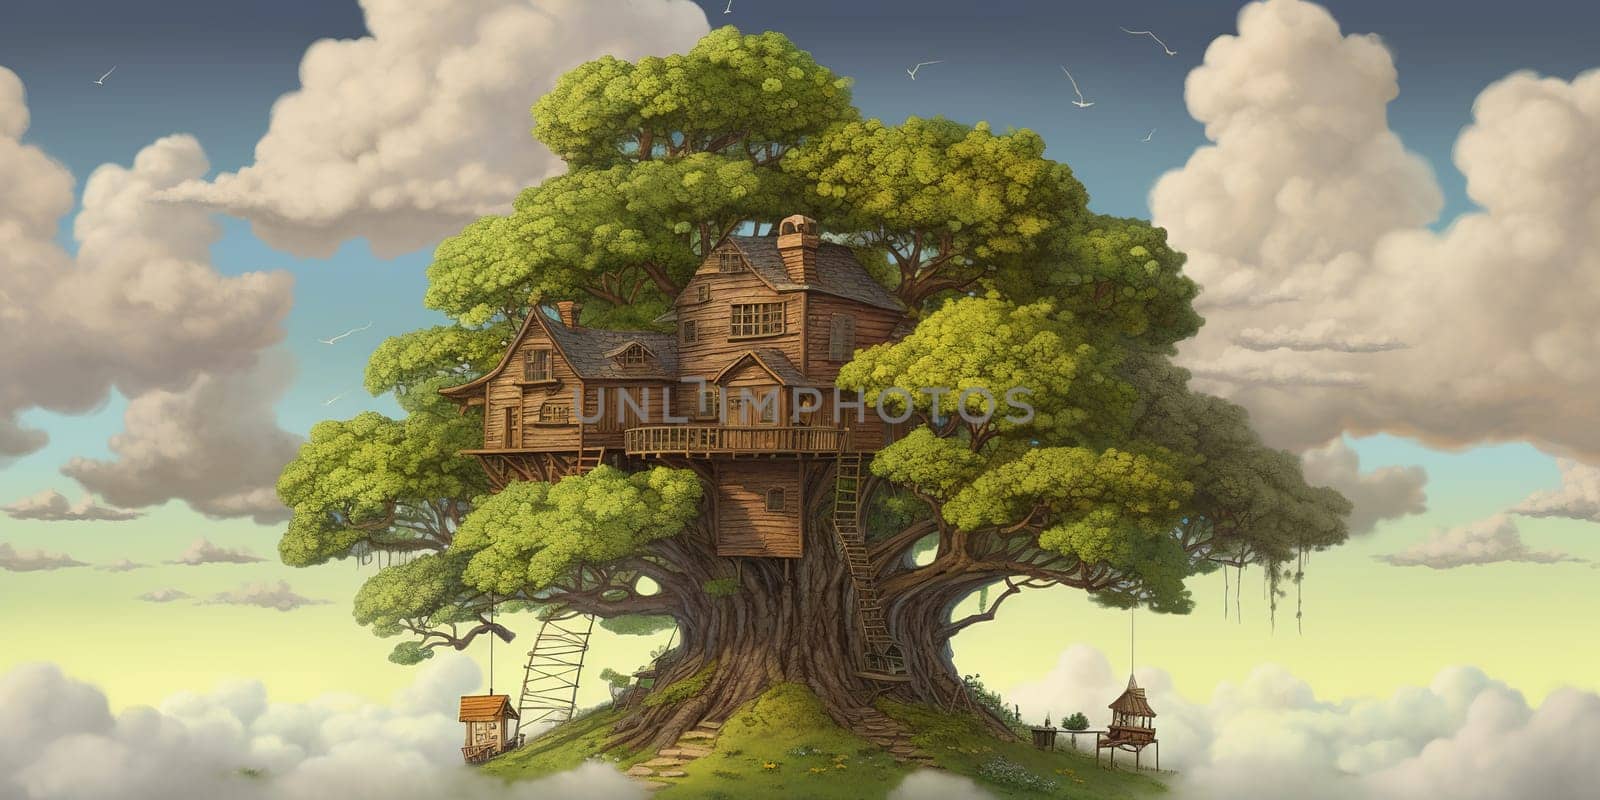 Huge fantasy tree with tiny houses in its crown serves as home for magical fairy-tale characters